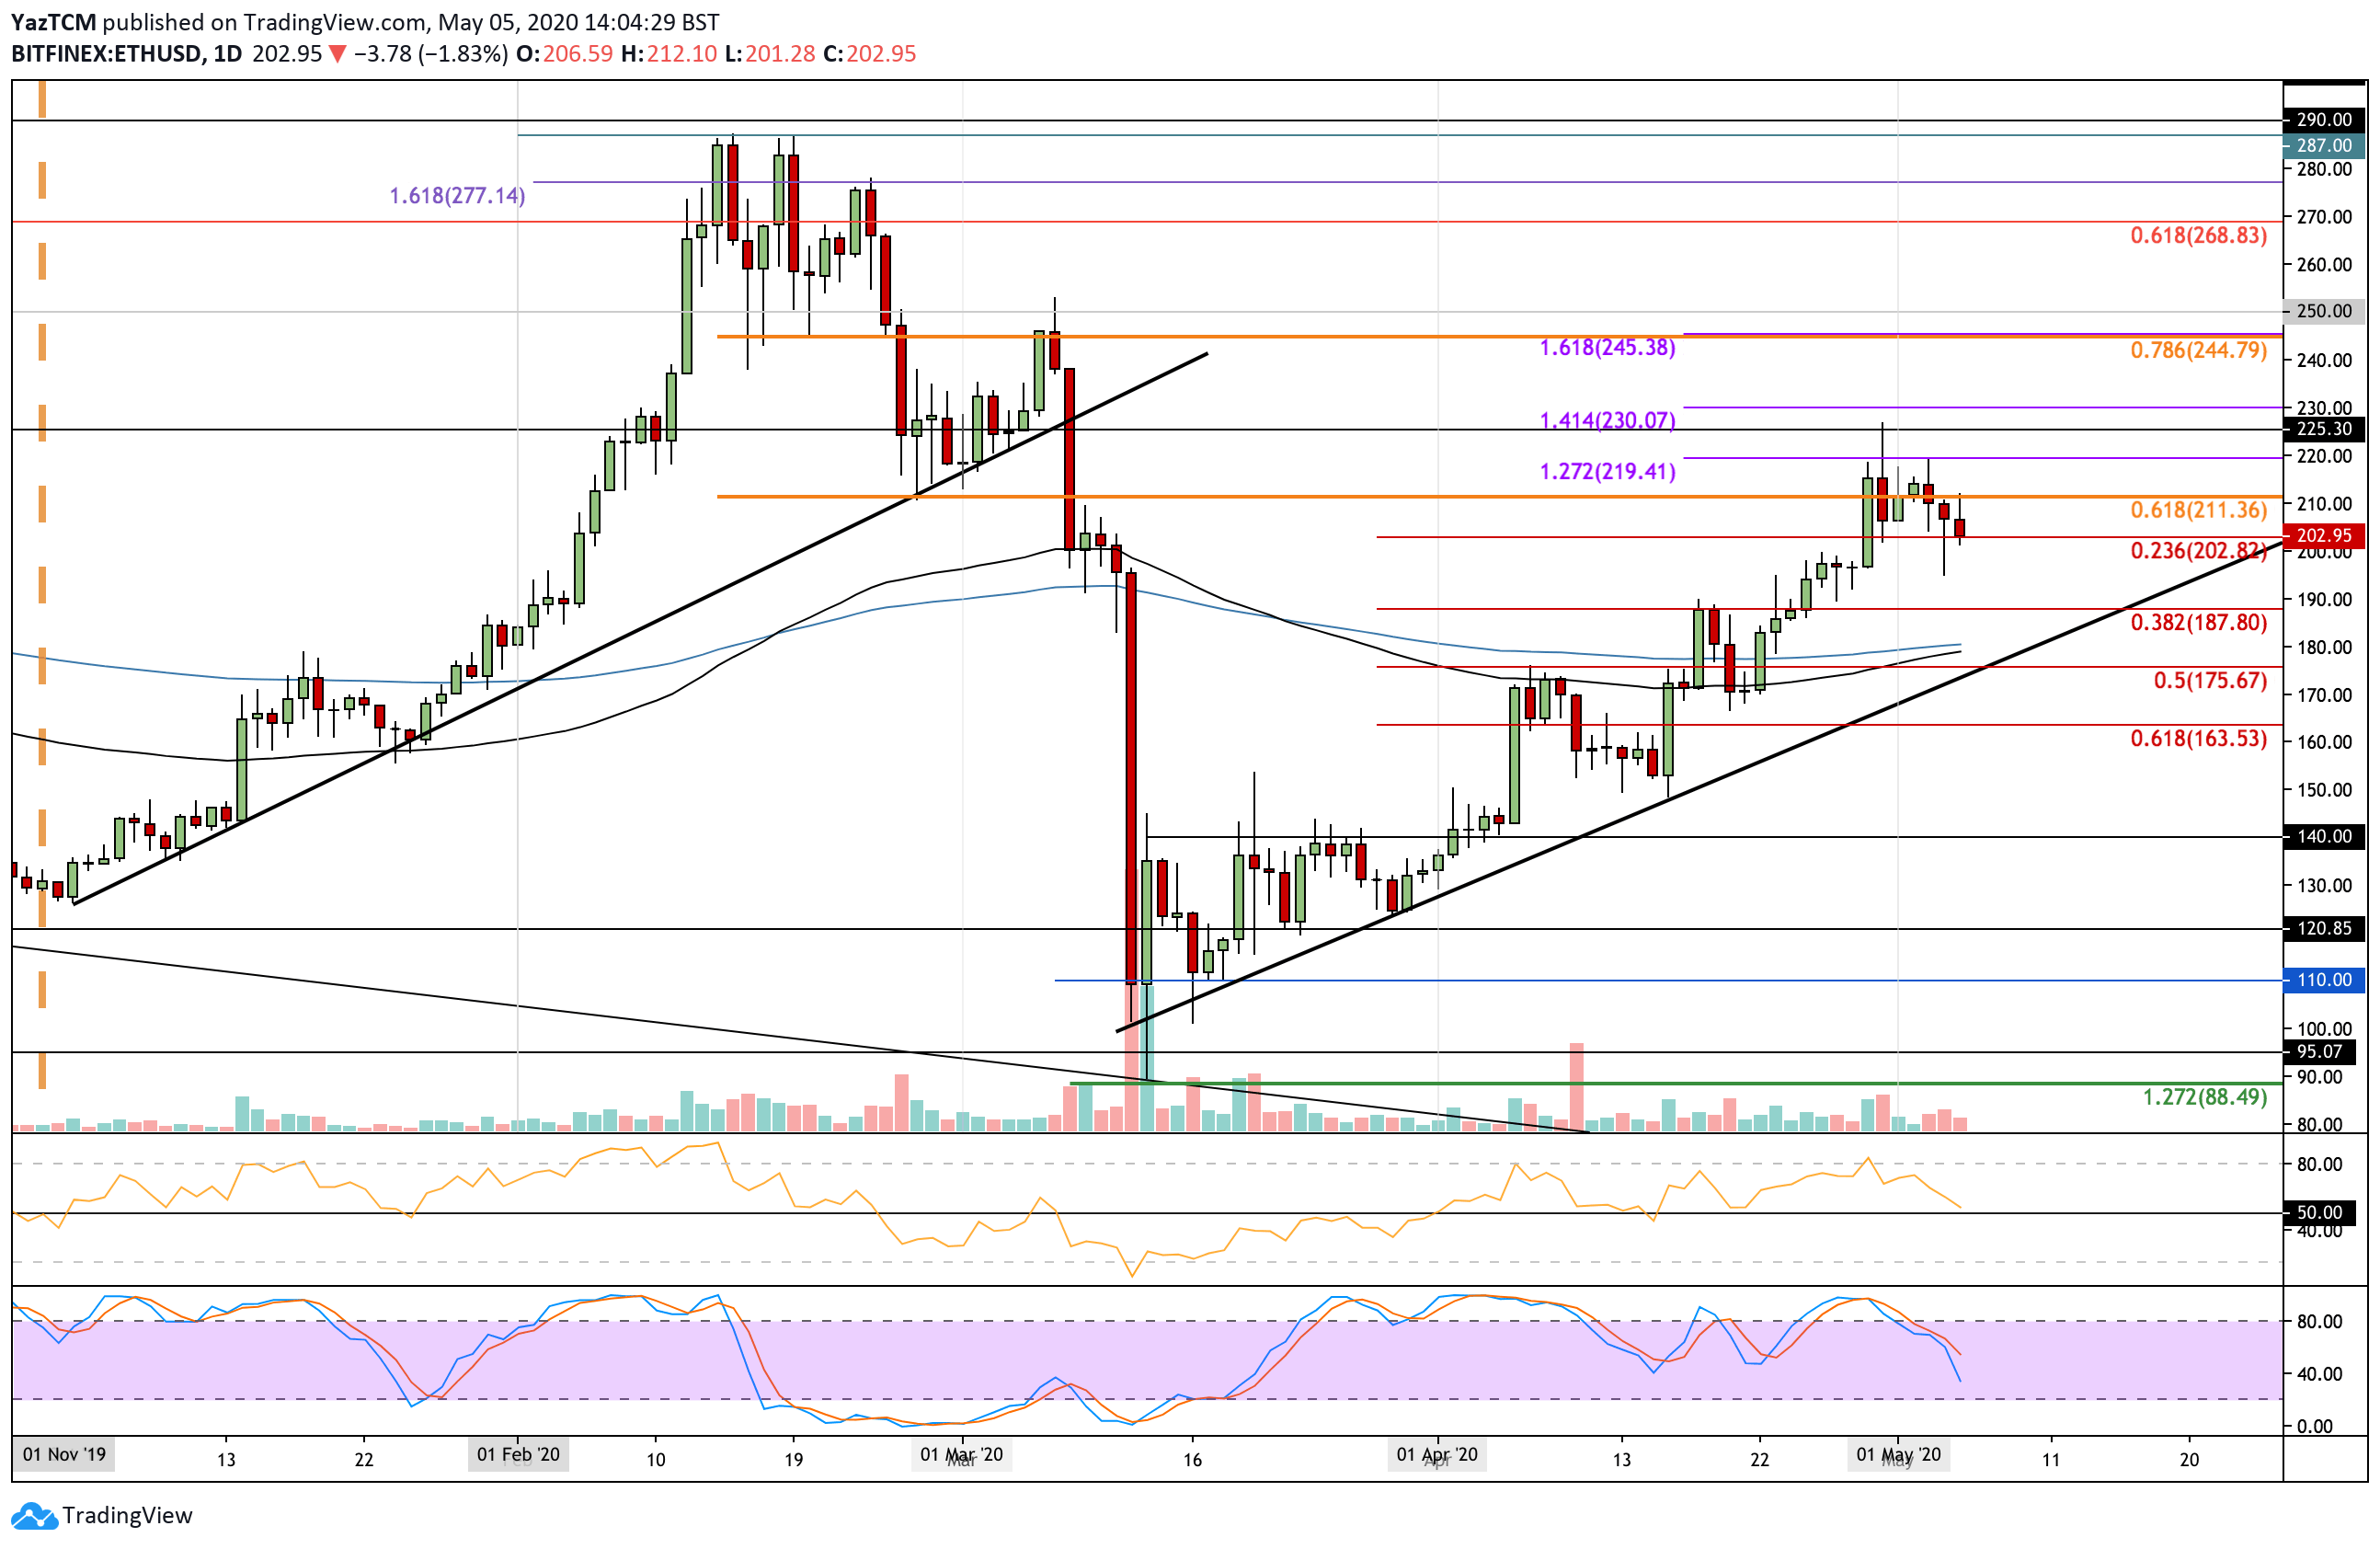 Ethereum Is About To Break Below The $200 Crucial Support As Bitcoin Struggles With $9K: ETH Price Analysis & Overview